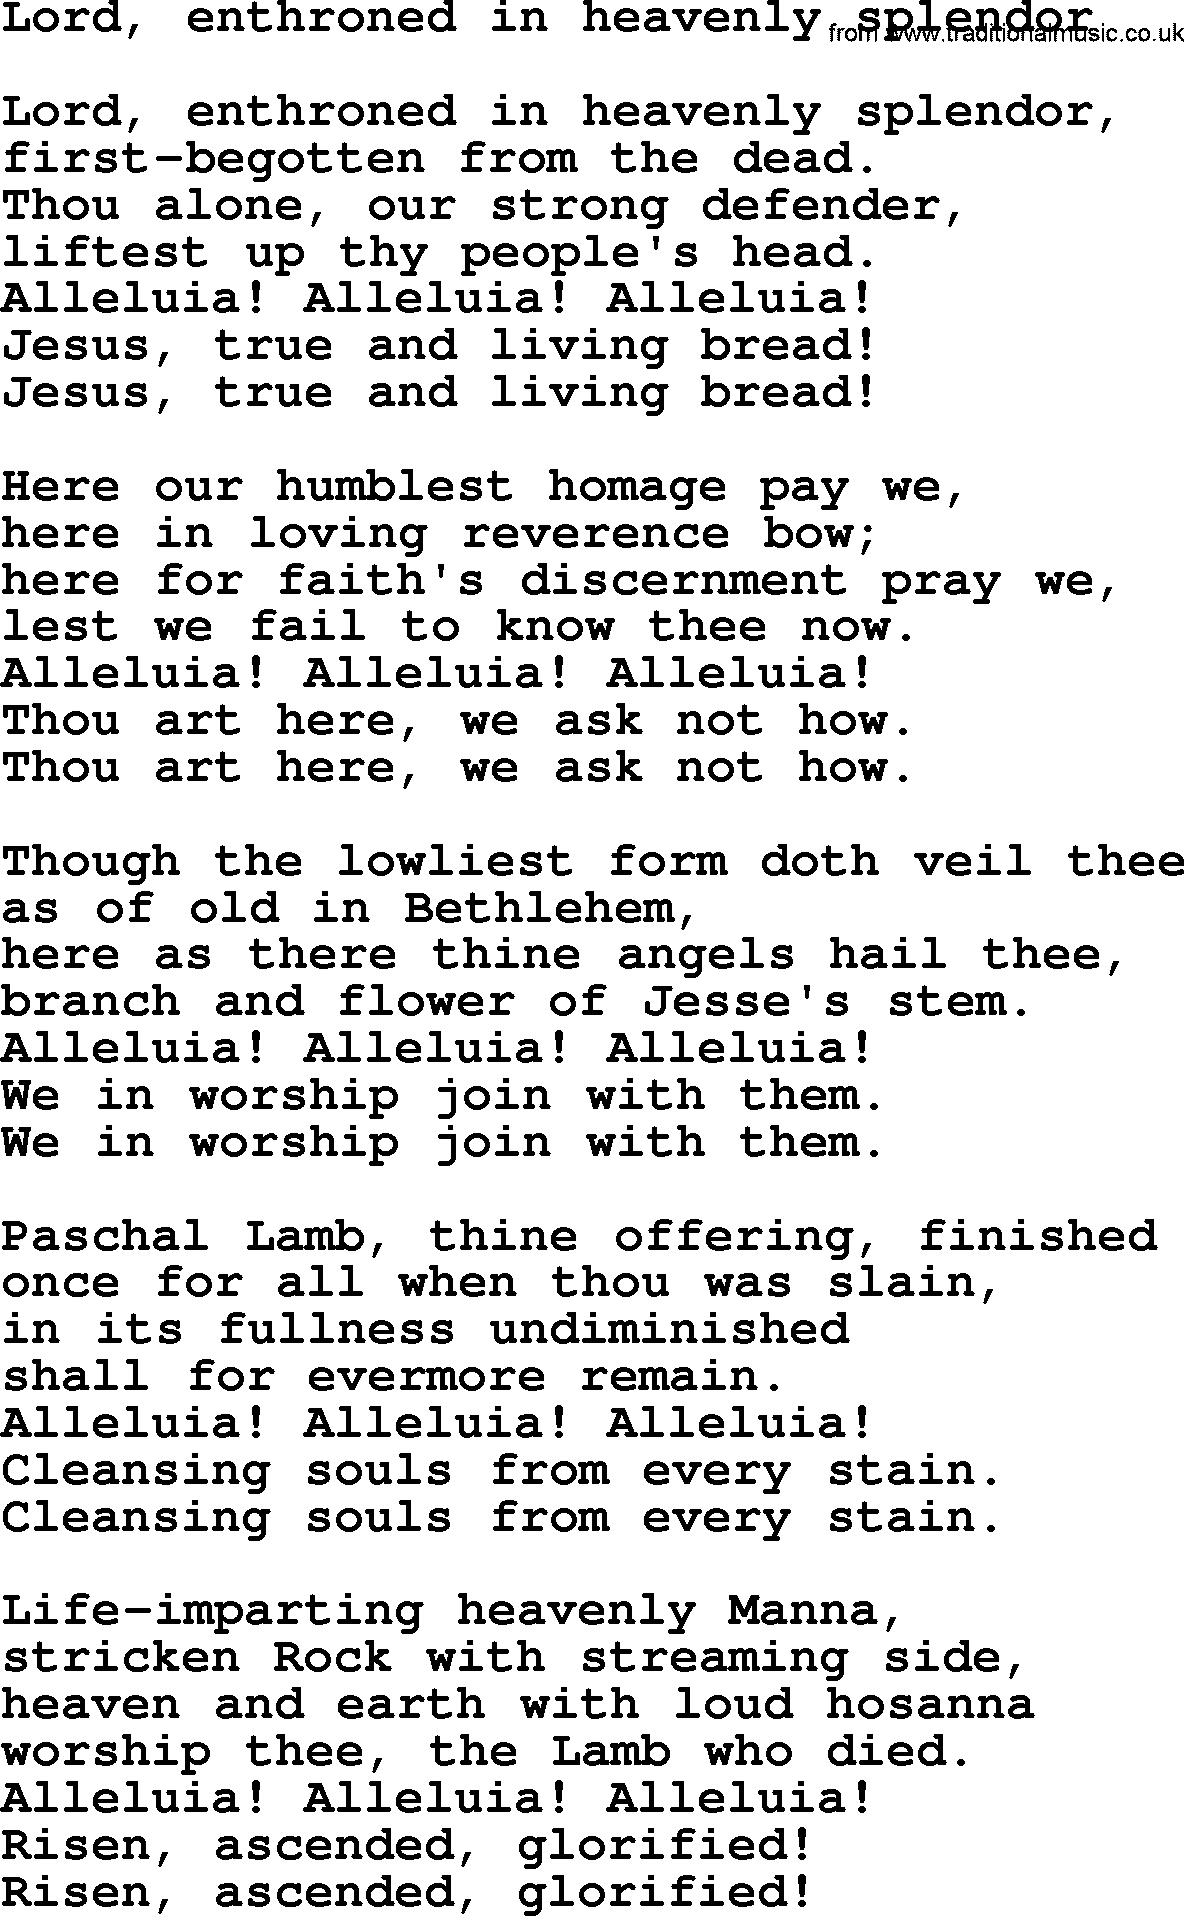 Christian hymns and song lyrics for Communion(The Eucharist): Lord, Enthroned In Heavenly Splendor, lyrics with PDF